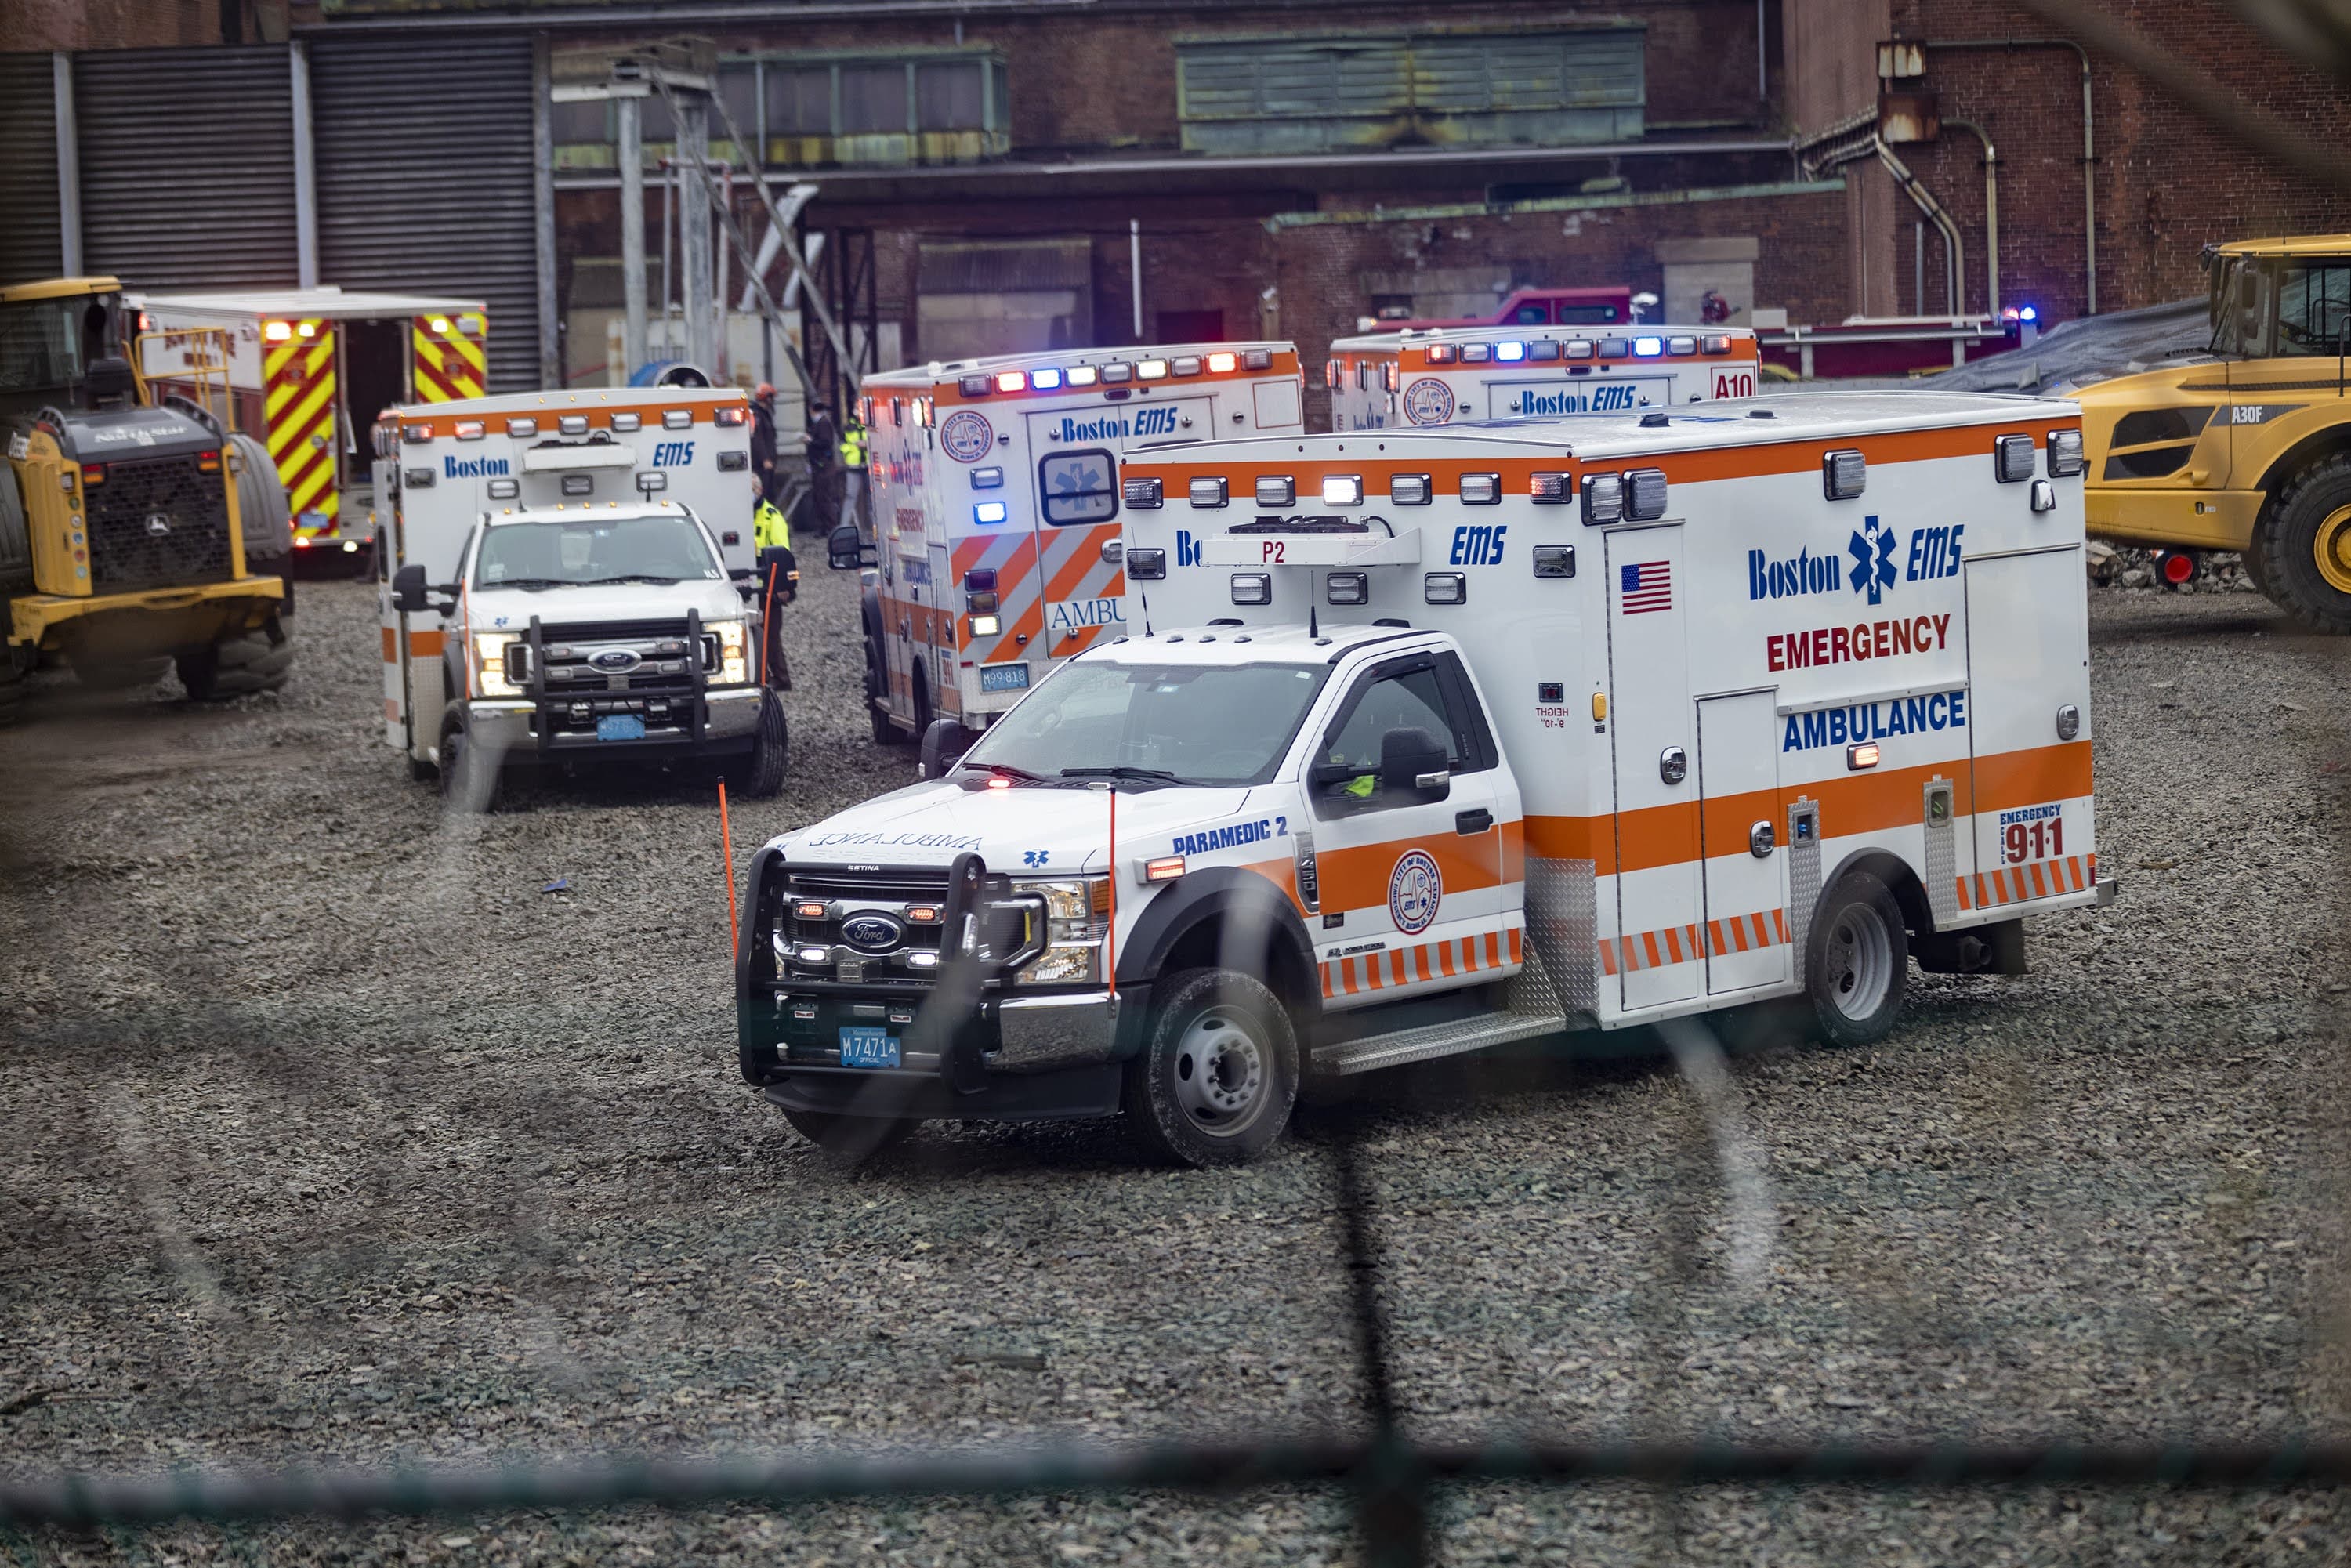 An ambulance leaves the scene with the worker who was trapped for several hours after a partial building collapse at the old Boston Edison power plant in South Boston. (Jesse Costa/WBUR)